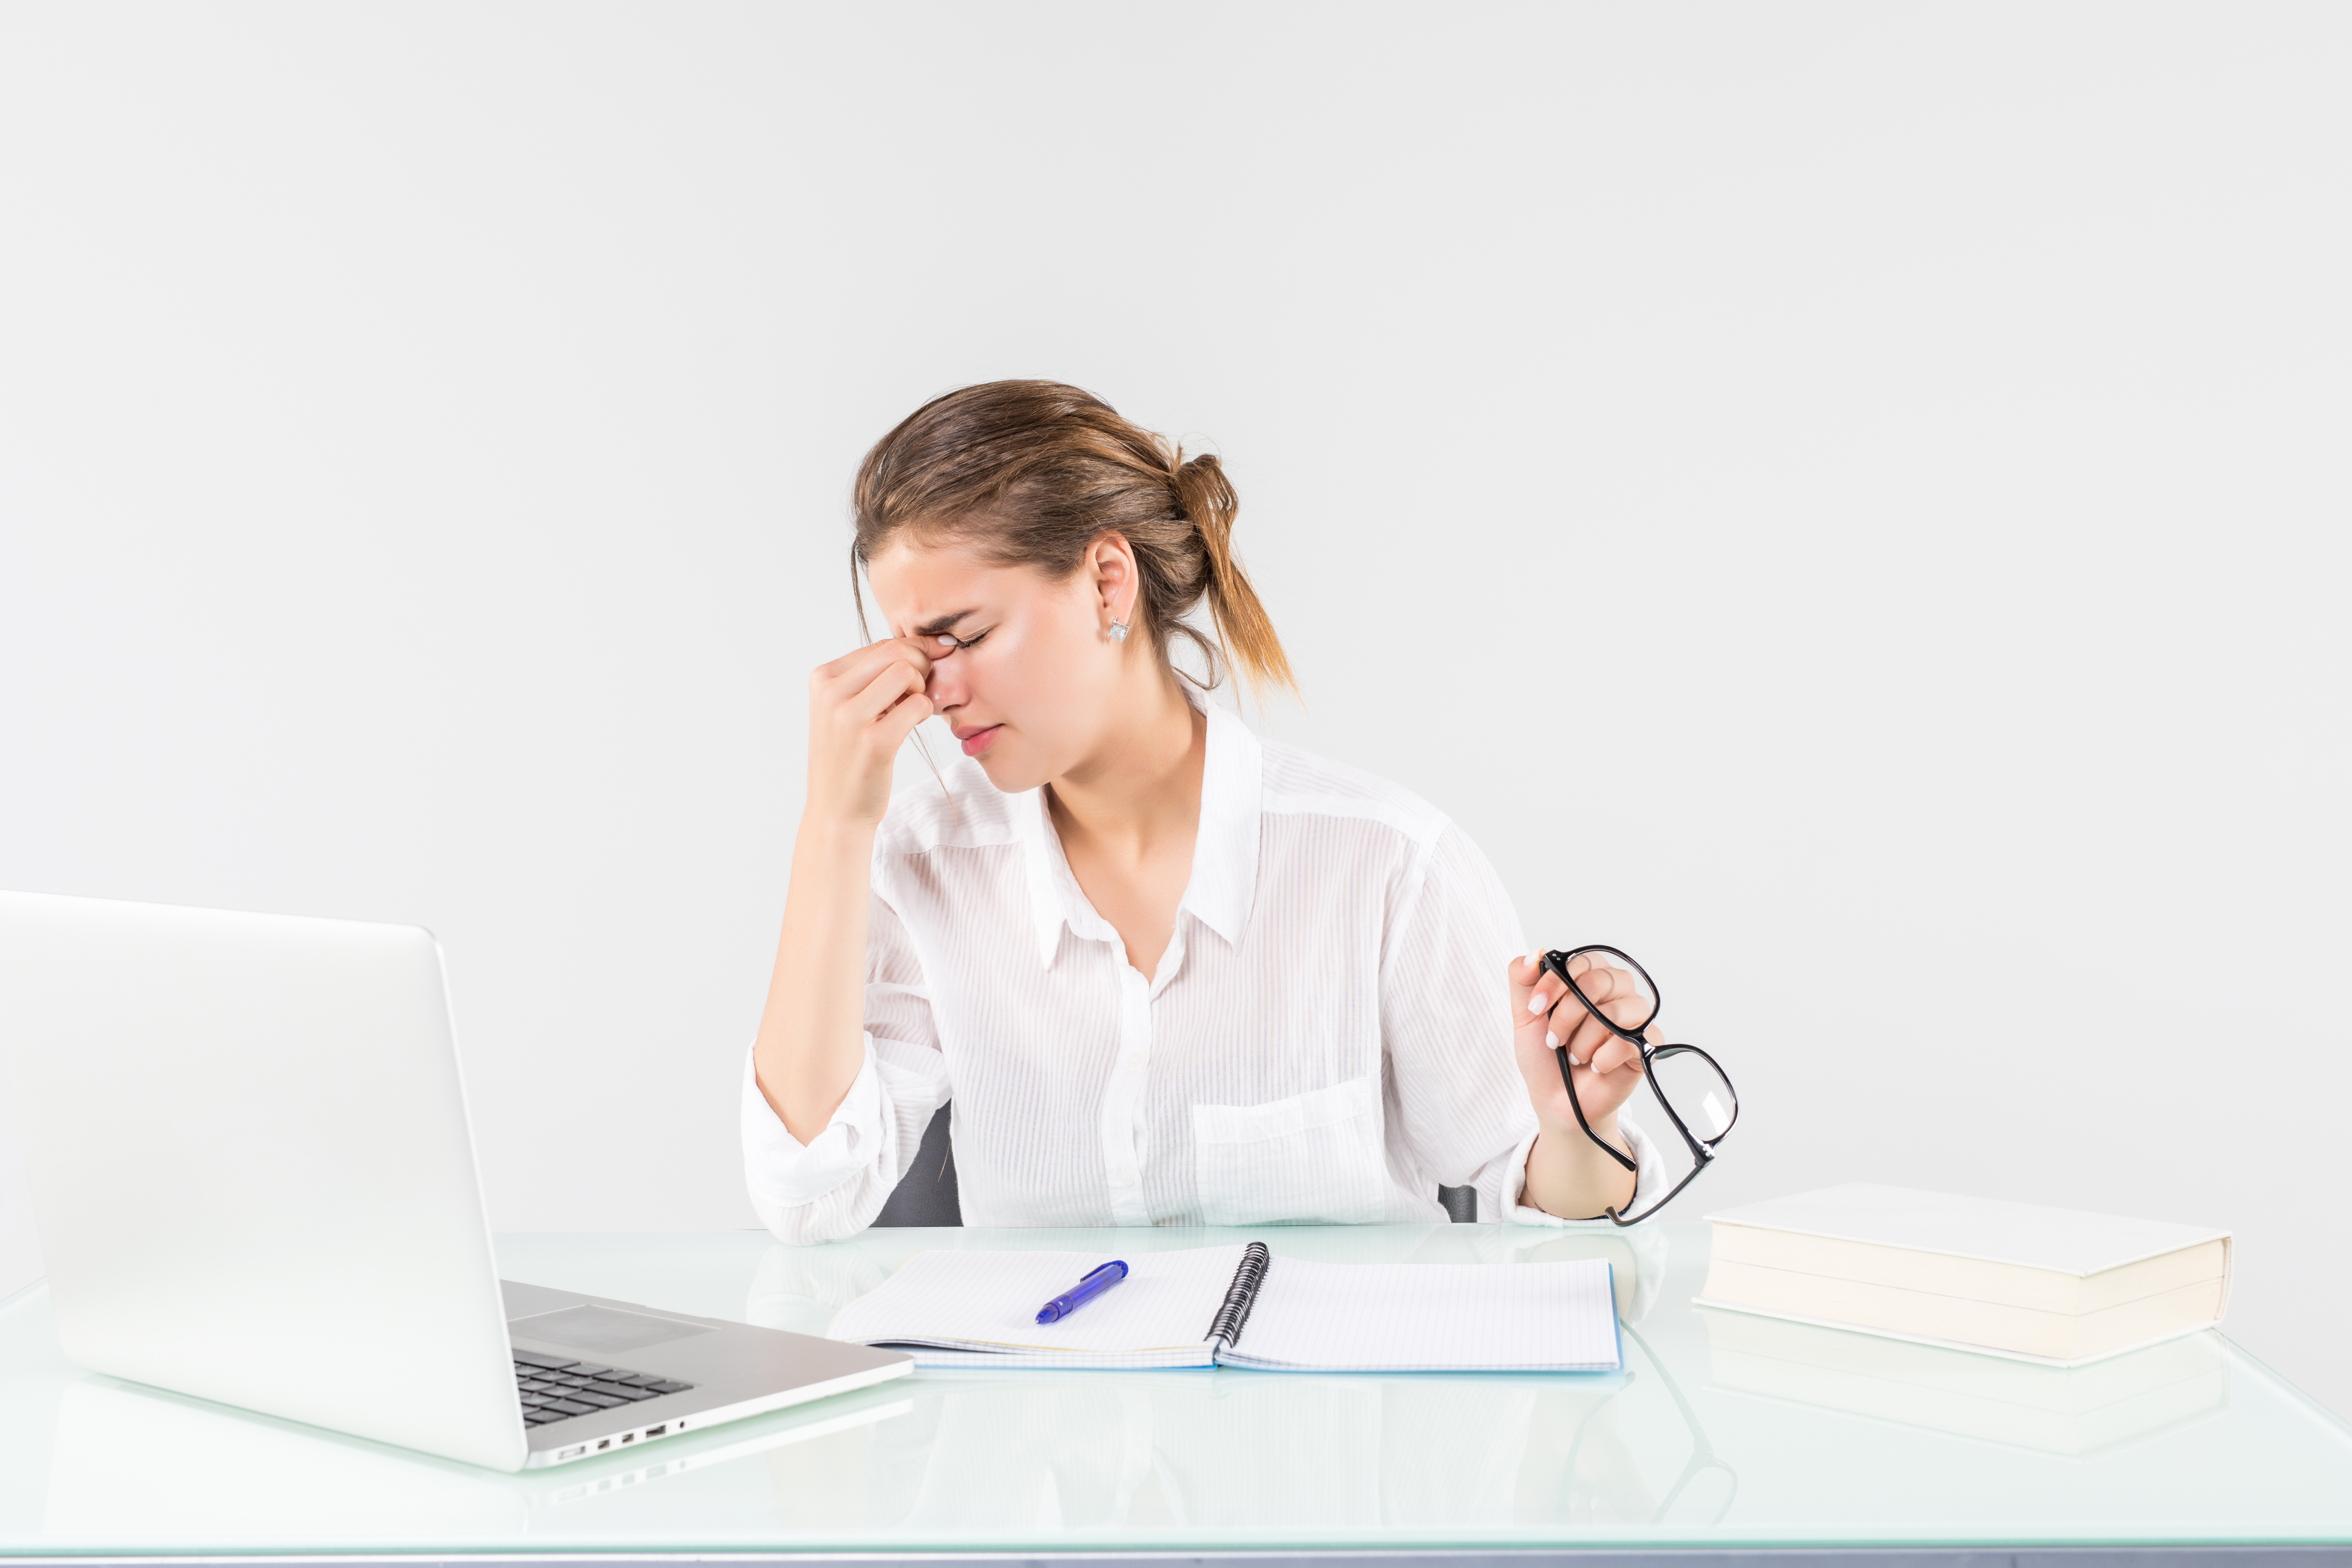 A tired woman in front of a laptop, isolated on white background